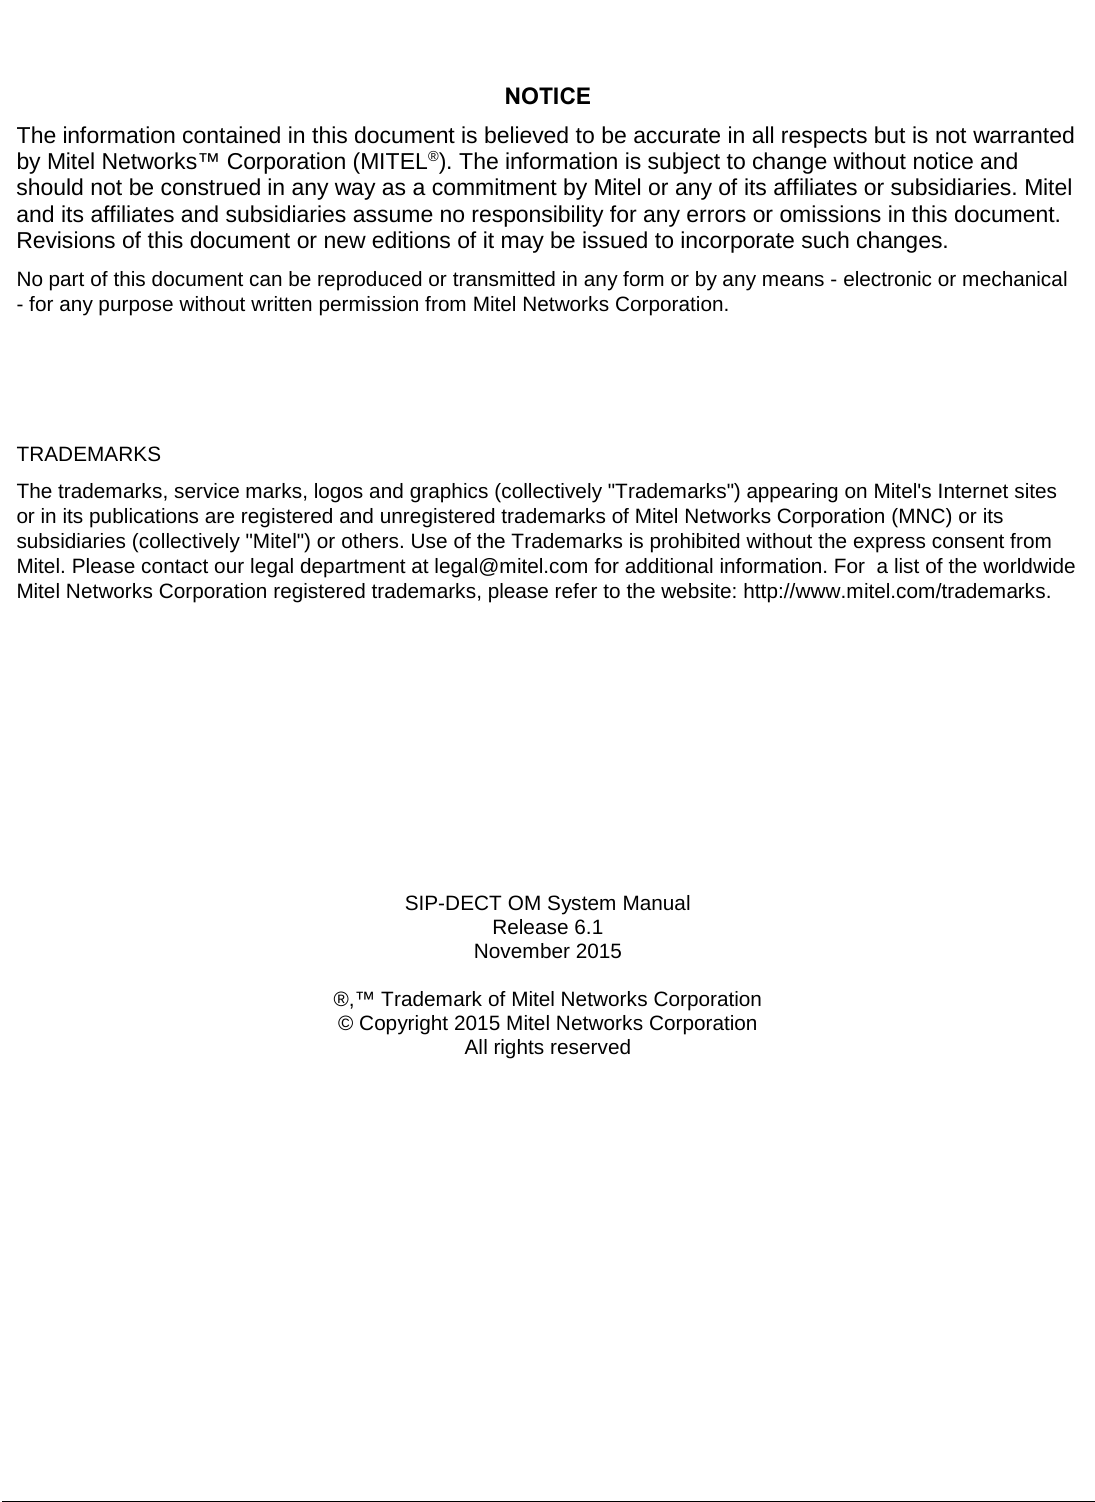          NOTICE The information contained in this document is believed to be accurate in all respects but is not warranted by Mitel Networks™ Corporation (MITEL®). The information is subject to change without notice and should not be construed in any way as a commitment by Mitel or any of its affiliates or subsidiaries. Mitel and its affiliates and subsidiaries assume no responsibility for any errors or omissions in this document. Revisions of this document or new editions of it may be issued to incorporate such changes.    No part of this document can be reproduced or transmitted in any form or by any means - electronic or mechanical - for any purpose without written permission from Mitel Networks Corporation.    TRADEMARKS  The trademarks, service marks, logos and graphics (collectively &quot;Trademarks&quot;) appearing on Mitel&apos;s Internet sites or in its publications are registered and unregistered trademarks of Mitel Networks Corporation (MNC) or its subsidiaries (collectively &quot;Mitel&quot;) or others. Use of the Trademarks is prohibited without the express consent from Mitel. Please contact our legal department at legal@mitel.com for additional information. For  a list of the worldwide Mitel Networks Corporation registered trademarks, please refer to the website: http://www.mitel.com/trademarks.       SIP-DECT OM System Manual Release 6.1  November 2015   ®,™ Trademark of Mitel Networks Corporation © Copyright 2015 Mitel Networks Corporation All rights reserved  